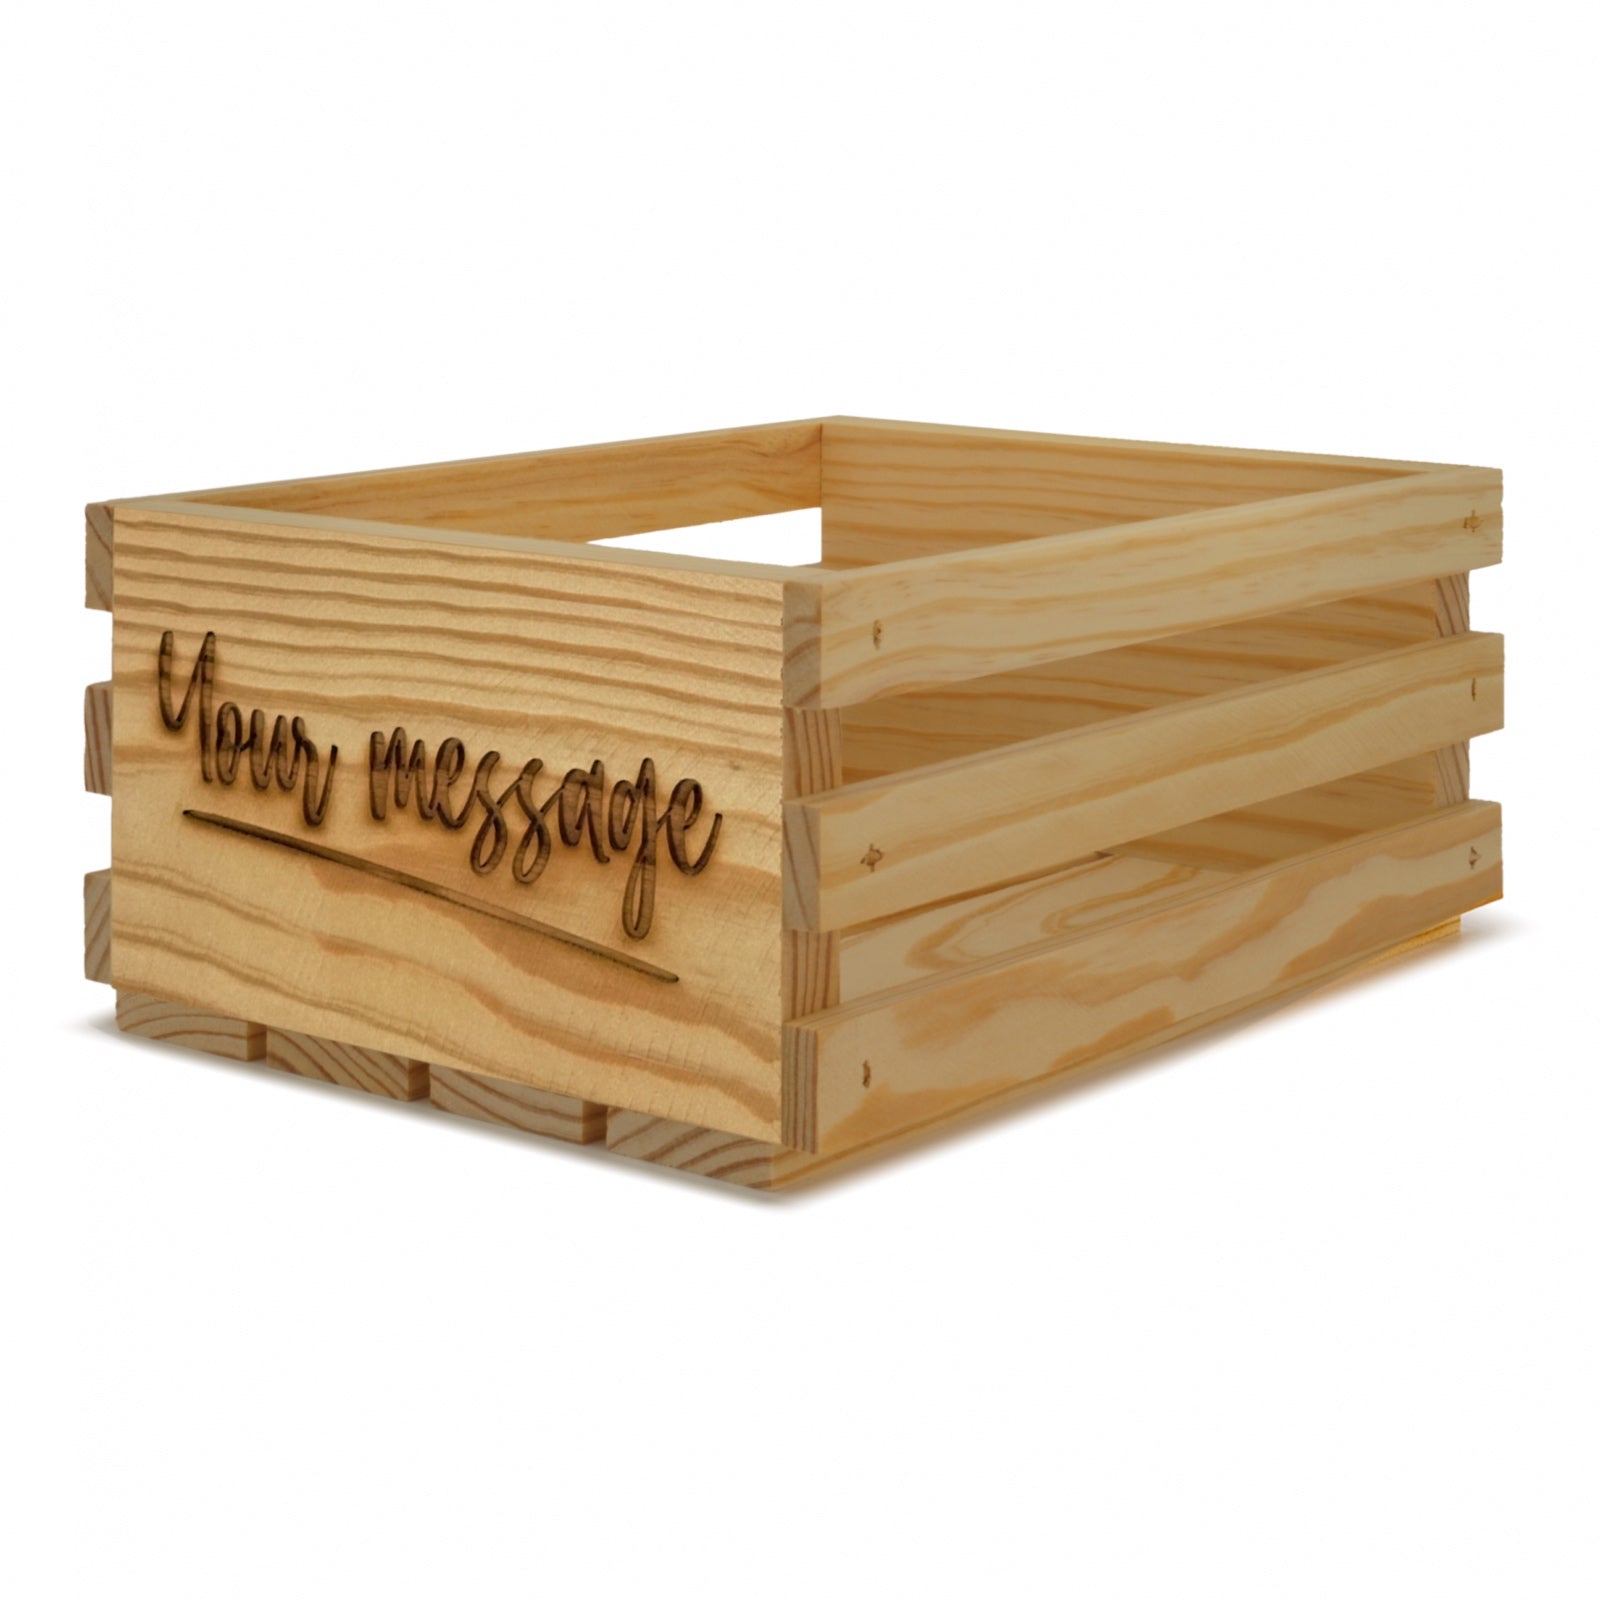 Small wooden crates 10x8x4.5 with your custom message, 6-SS-10-8-4.5-ST-NW-NL, 12-SS-10-8-4.5-ST-NW-NL, 24-SS-10-8-4.5-ST-NW-NL, 48-SS-10-8-4.5-ST-NW-NL, 96-SS-10-8-4.5-ST-NW-NL